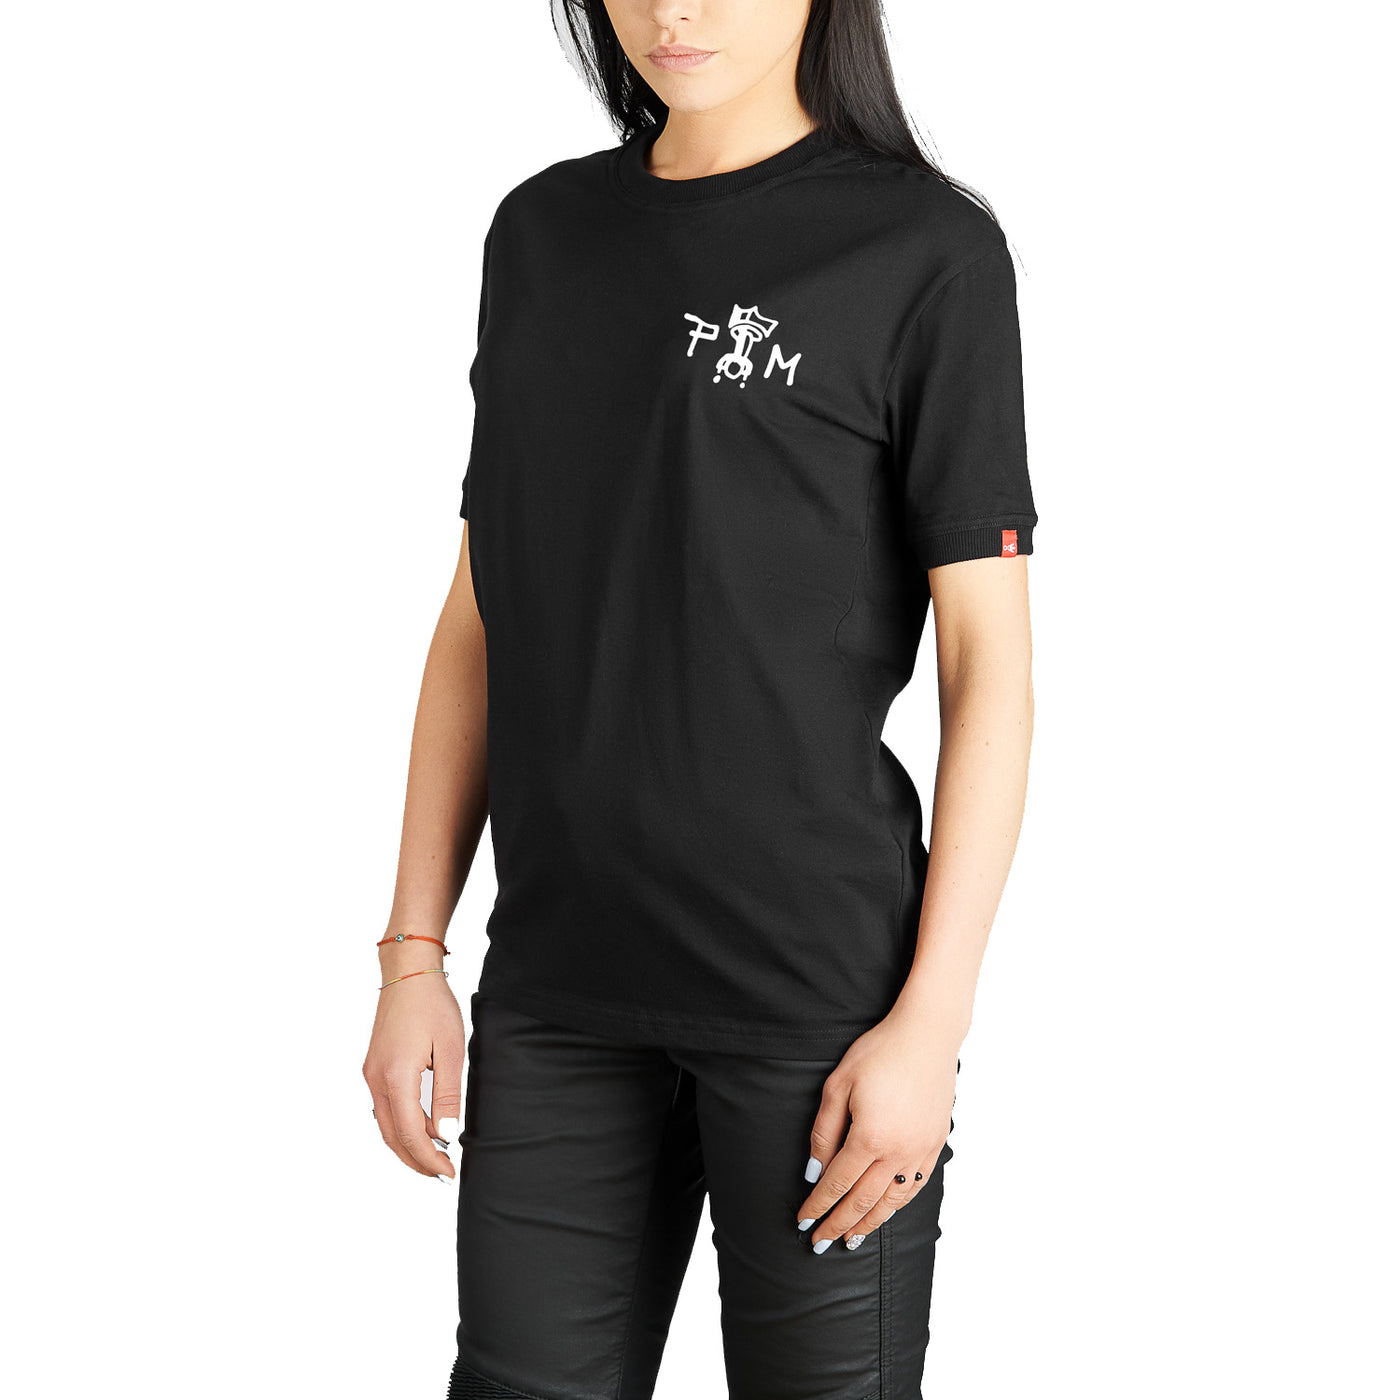 MIKE MOTO WING 1 - T-Shirt for bikers Regular Fit, Unisex